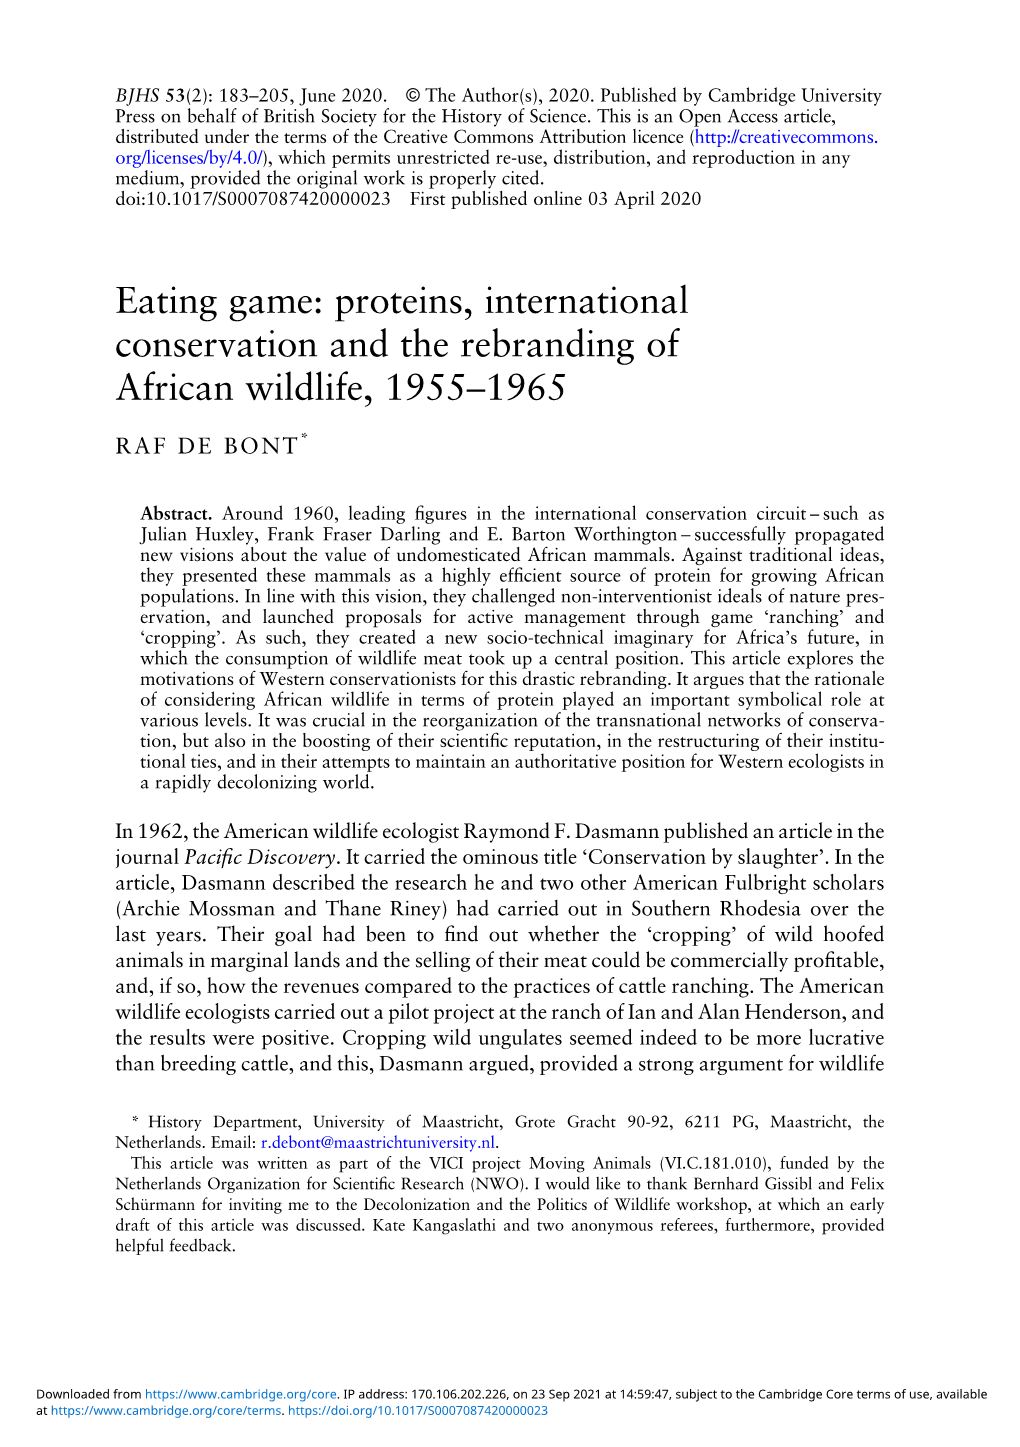 Eating Game: Proteins, International Conservation and the Rebranding of African Wildlife, 1955–1965